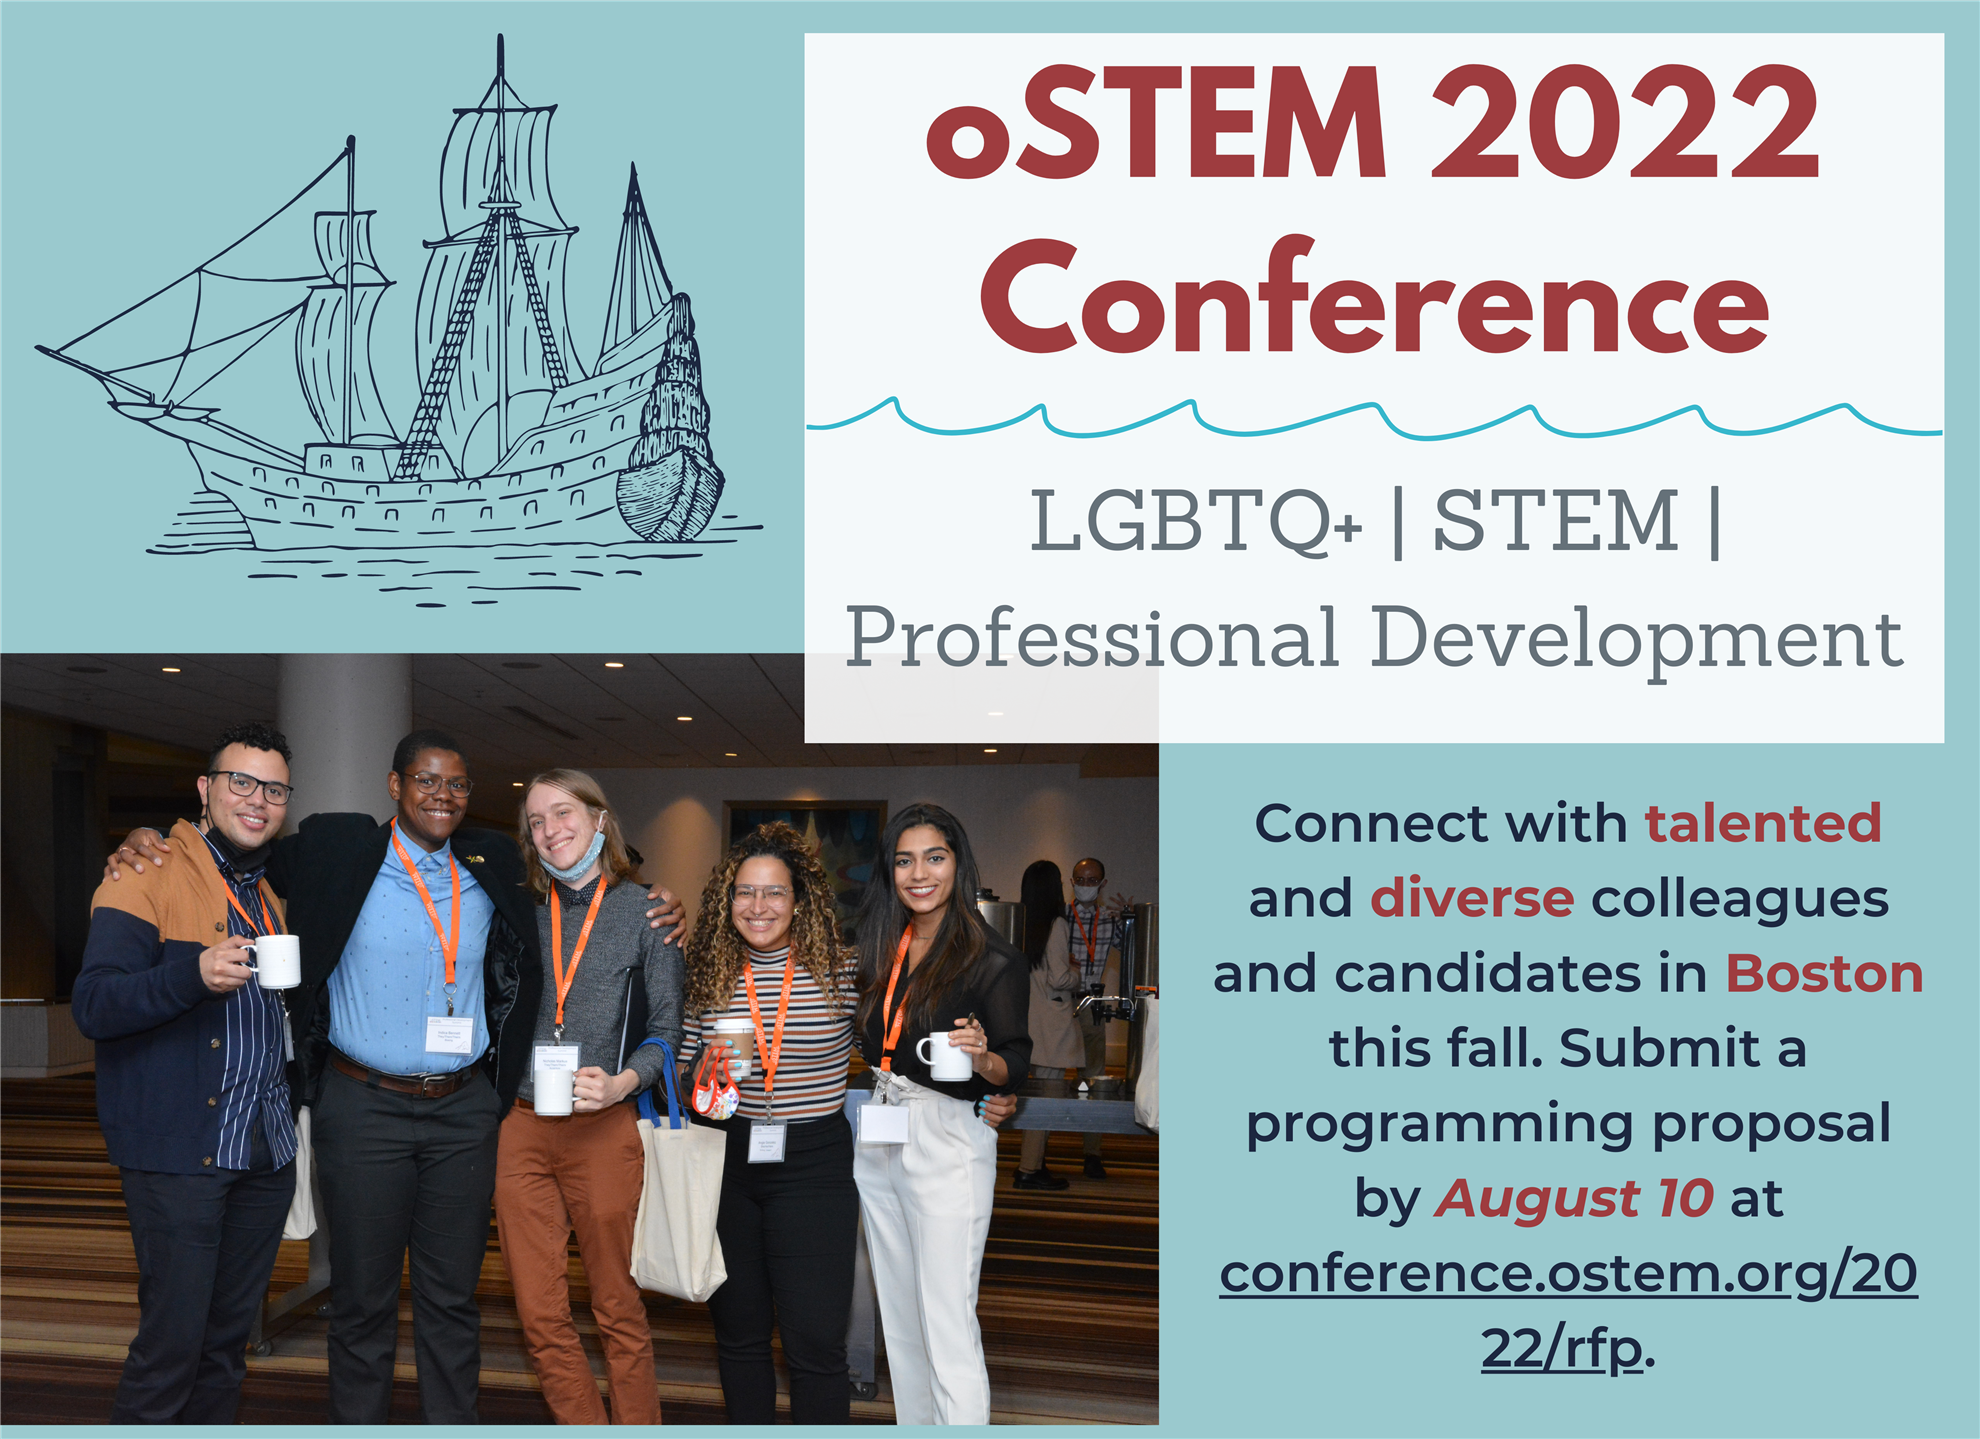 oSTEM 2022 Conference. Connect with talented and diverse colleagues and candidates in Boston this fall. Submit a programming proposal by August 10 at conference.ostem.org/2022/rfp